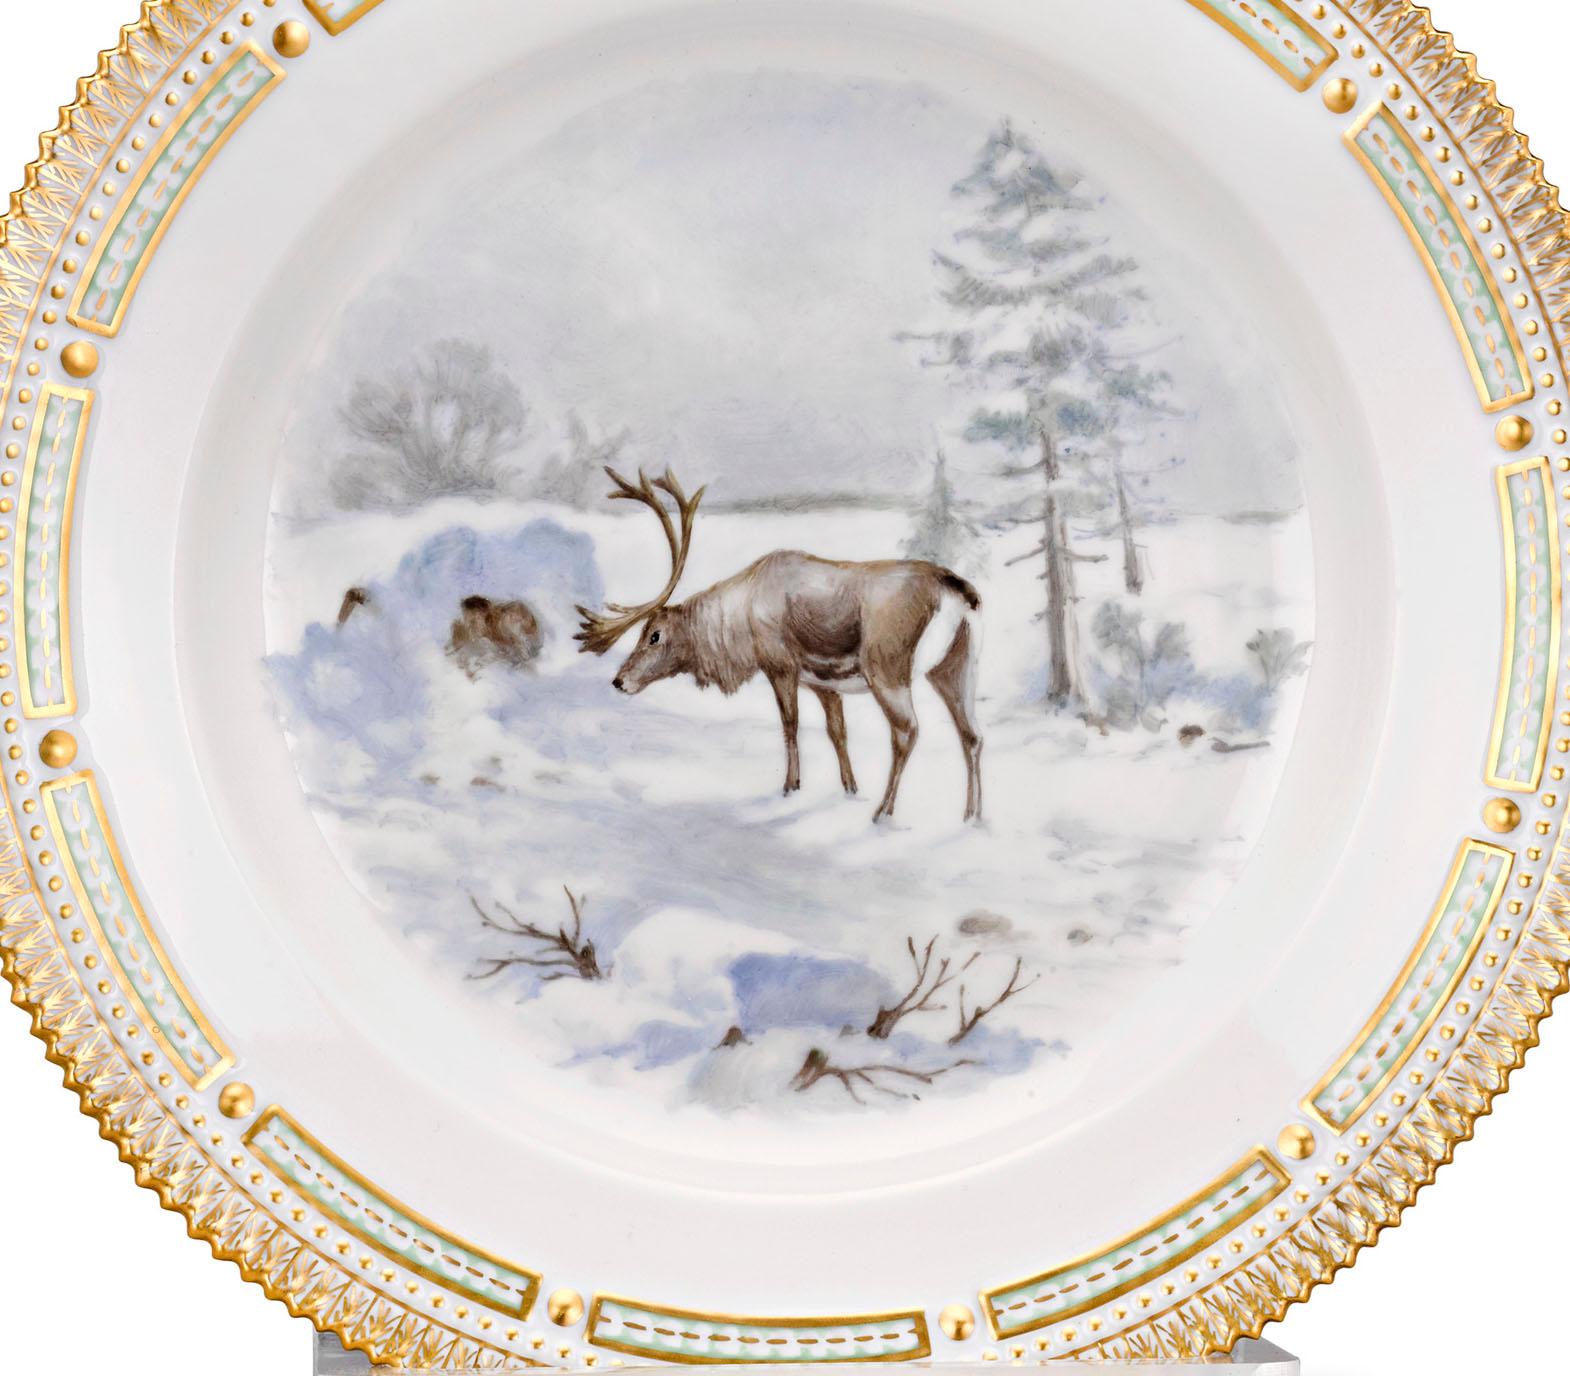 A reindeer is the star of the snowy scene on this extraordinarily rare porcelain dinner plate. Crafted by Royal Copenhagen, it is part of the firm's highly celebrated Flora Danica collection. Flora Danica is known worldwide for its intricate and